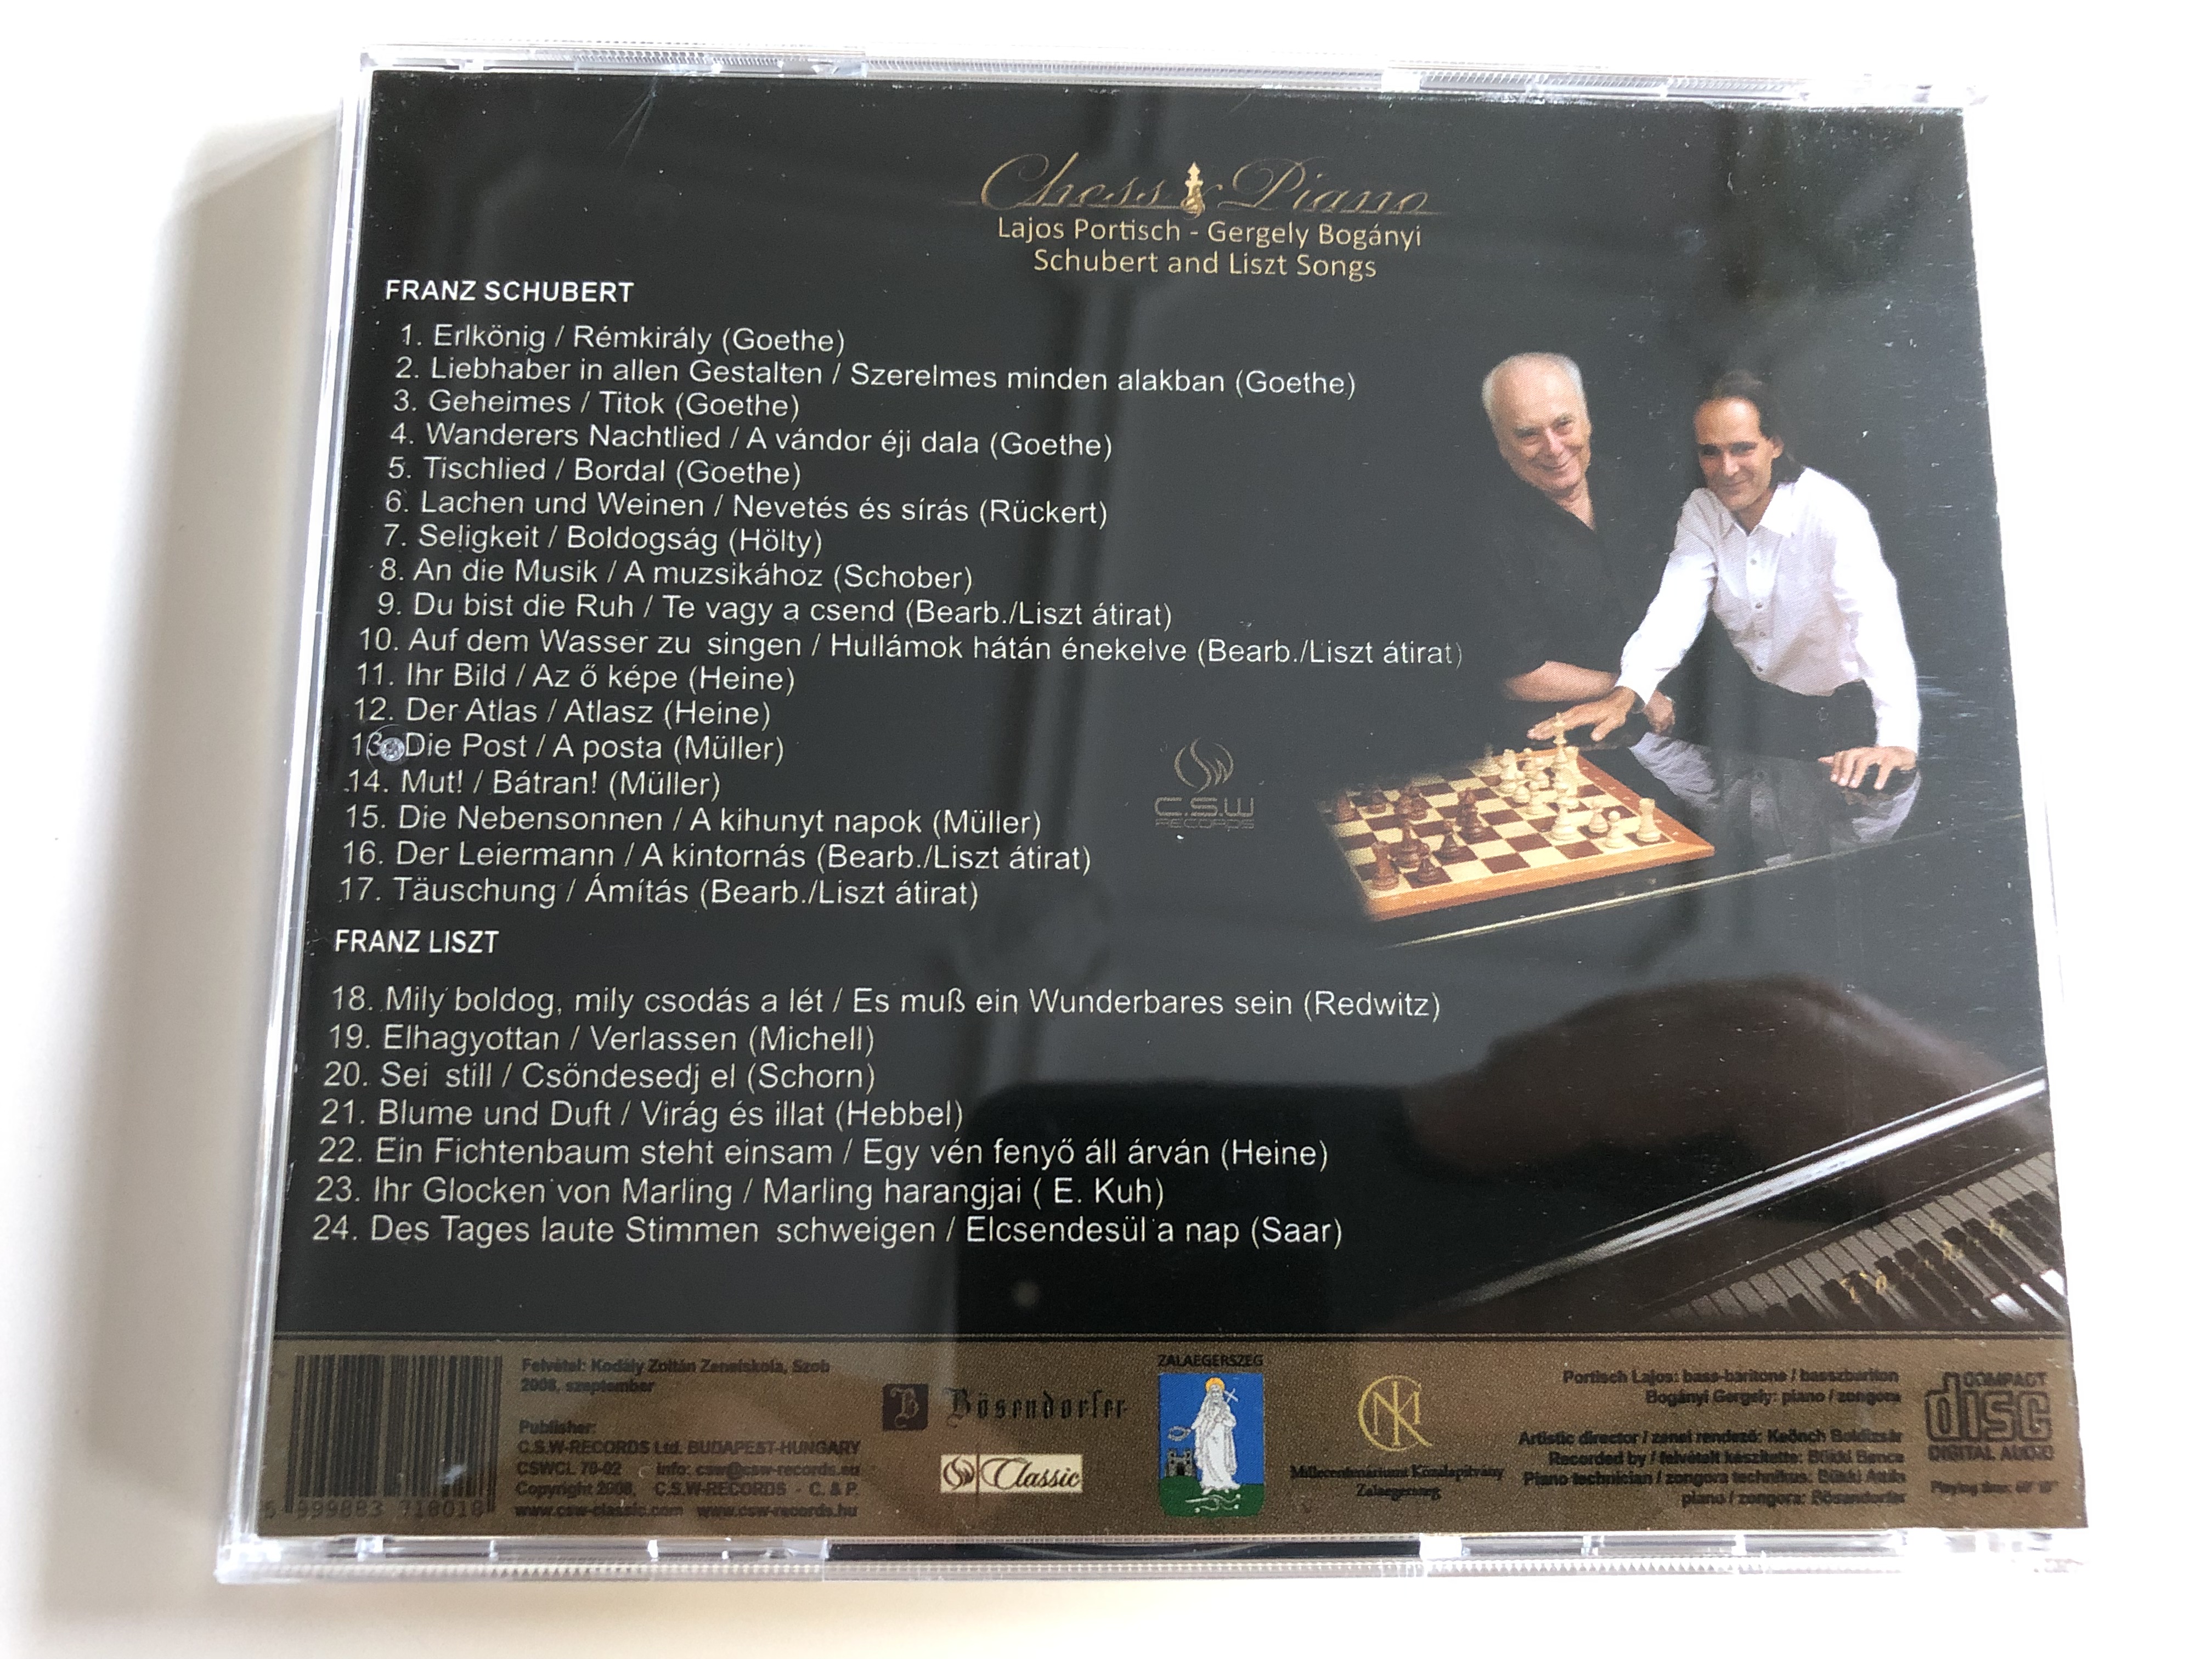 -chess-piano-lajos-portisch-gergely-bog-nyi-schubert-and-liszt-songs-audio-cd-2008-cswcl70-02-11-.jpg